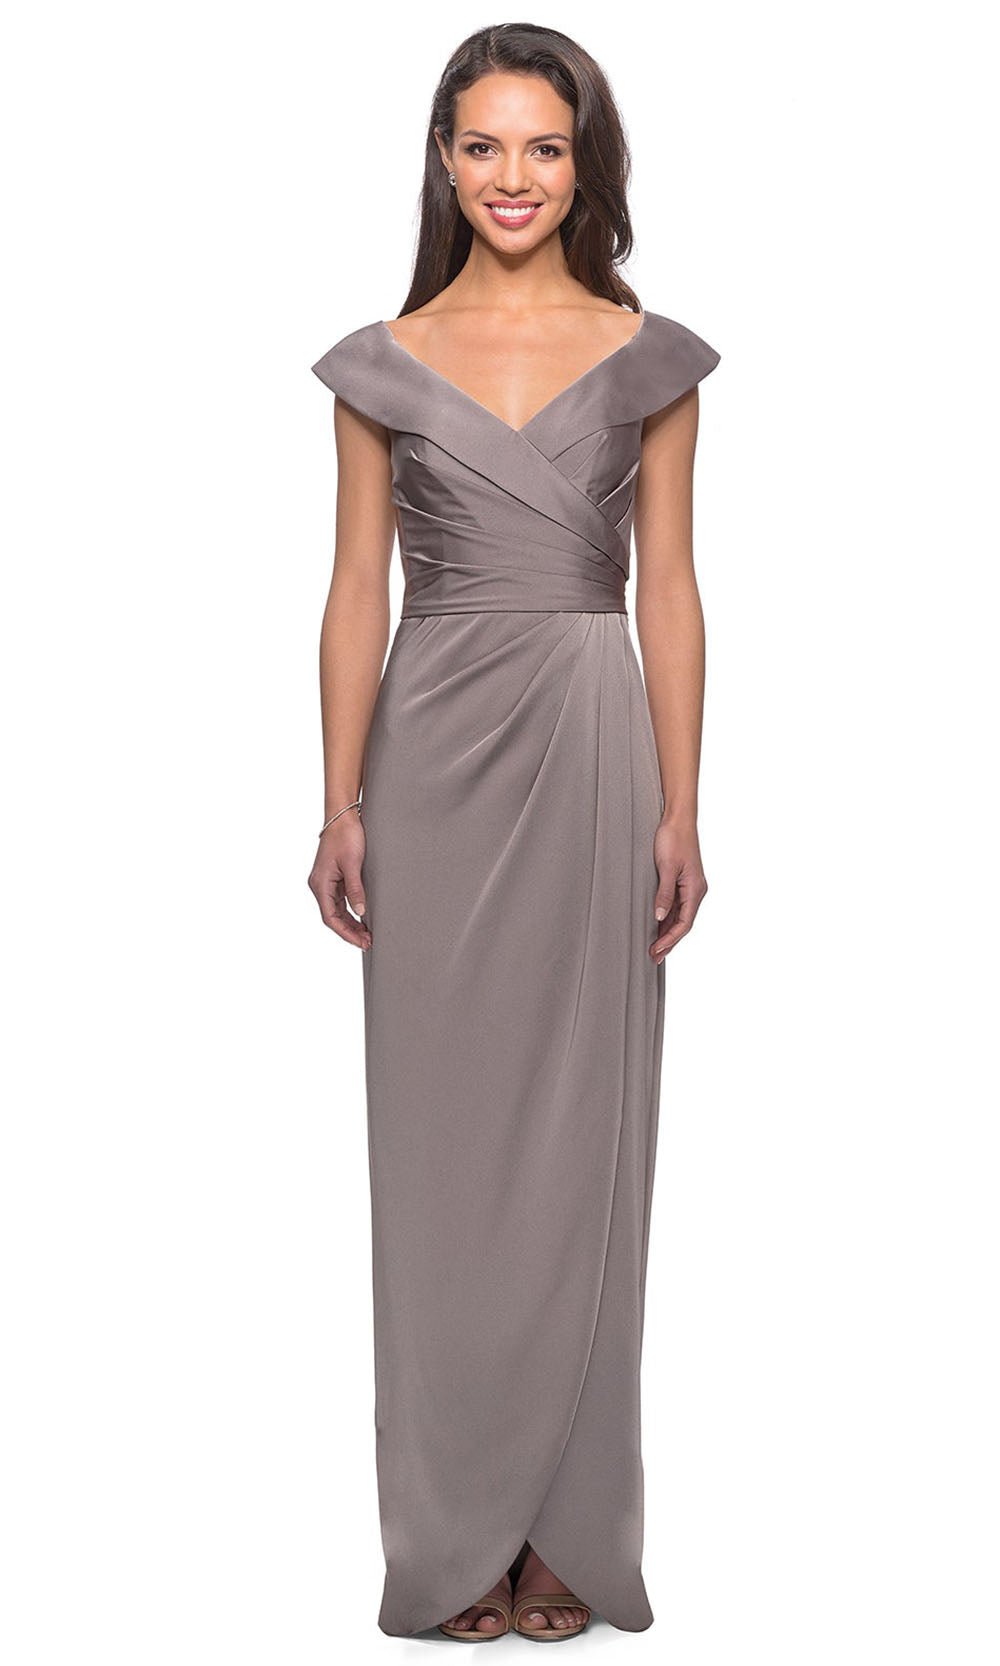 La Femme - 25206 Cap Sleeved Ruched Jersey Long Dress In Gray